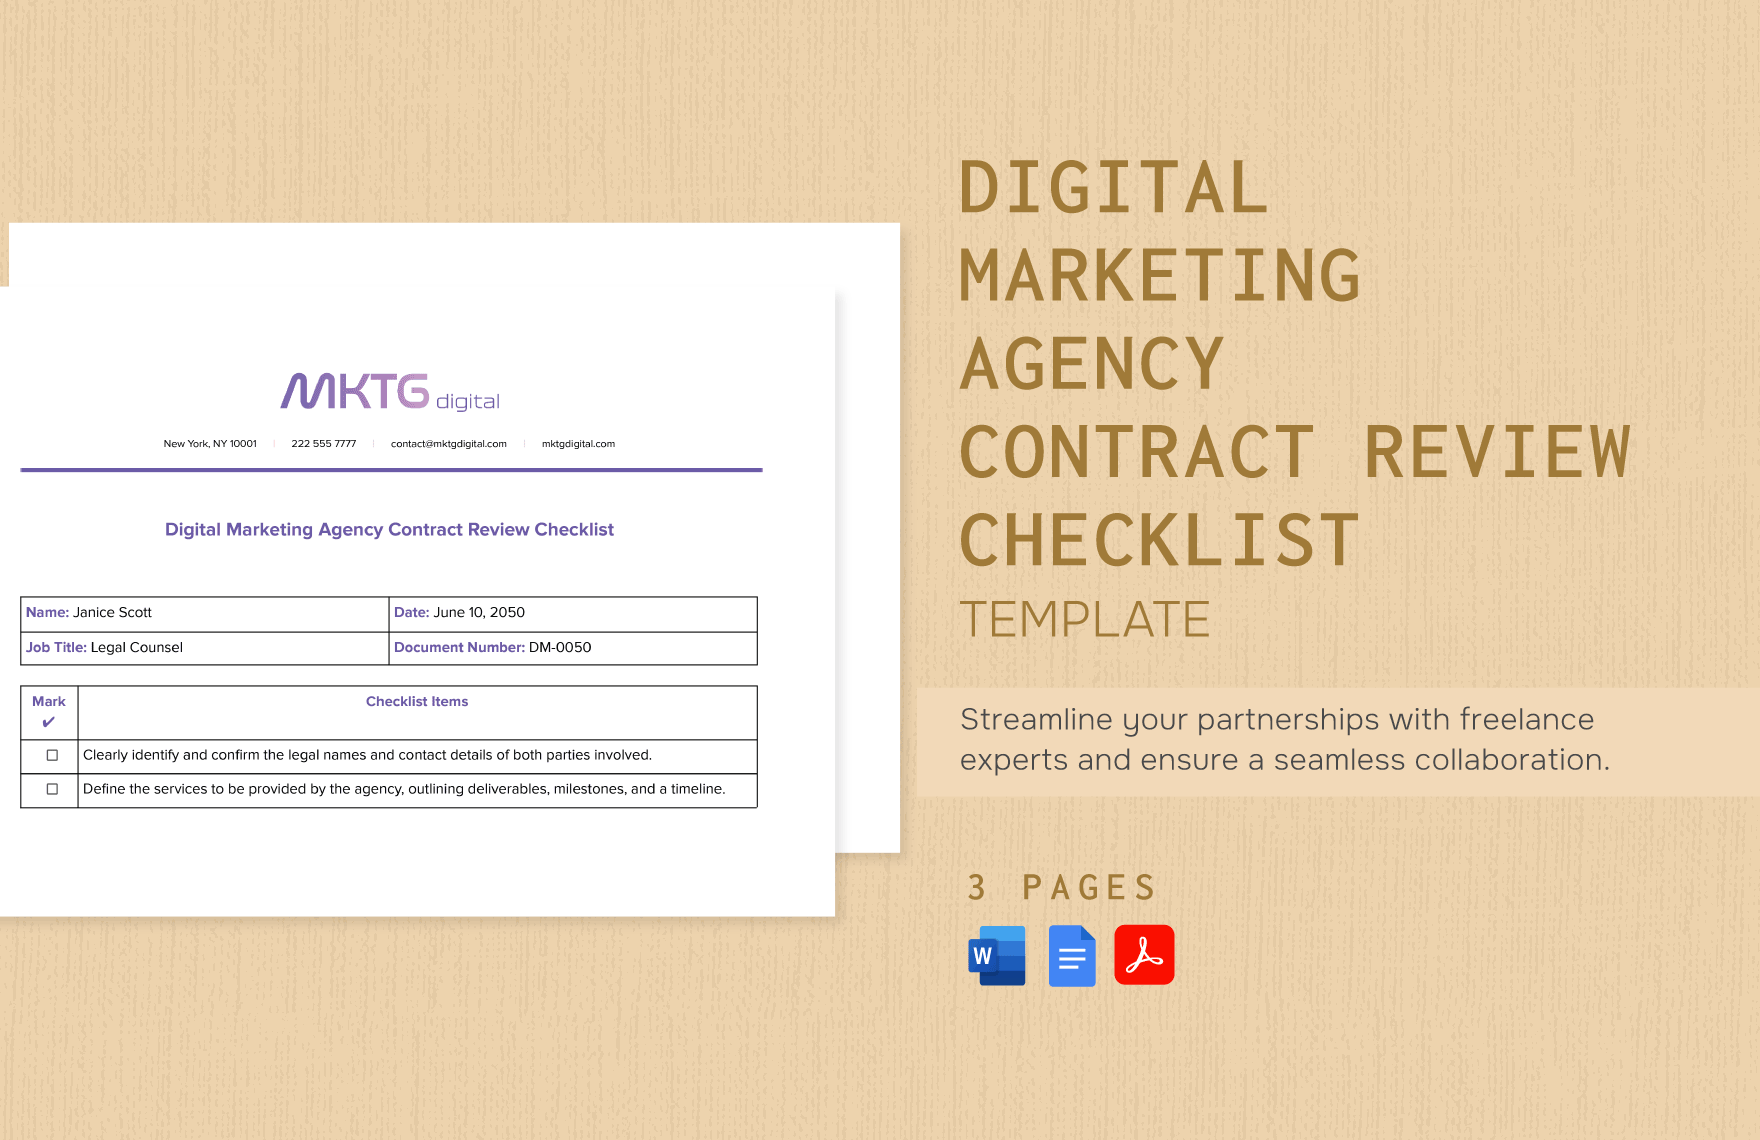 Digital Marketing Agency Contract Review Checklist Template